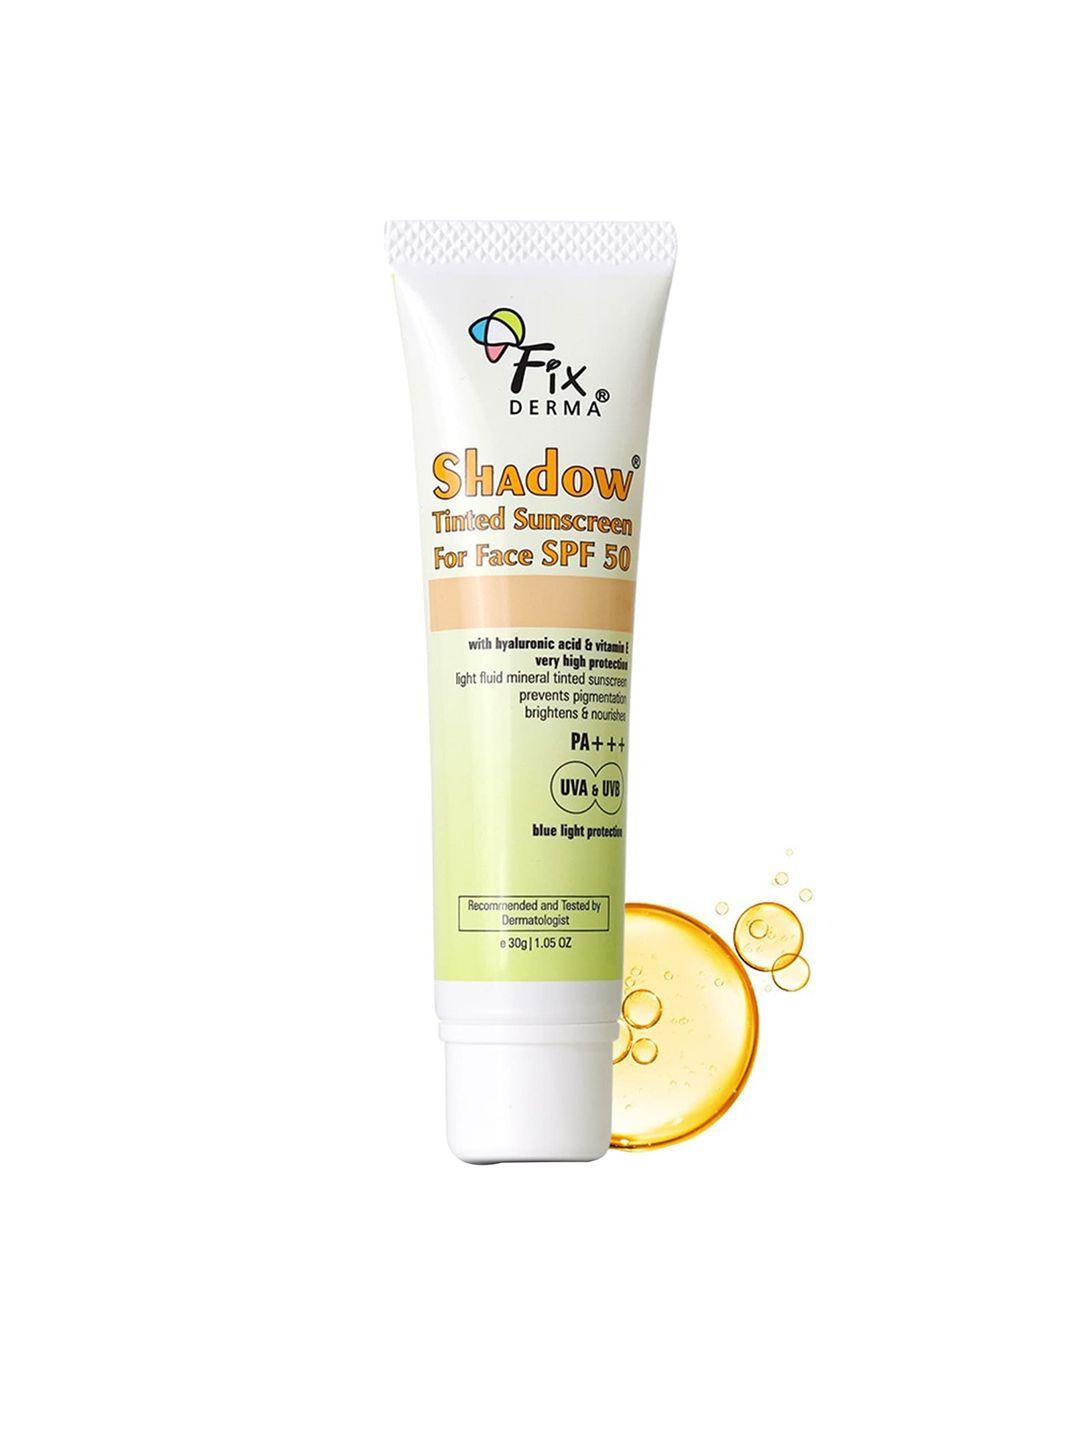 fixderma-shadow-tinted-spf-50-pa+++-sunscreen-with-vitamin-e-&-hyaluronic-acid---30-g